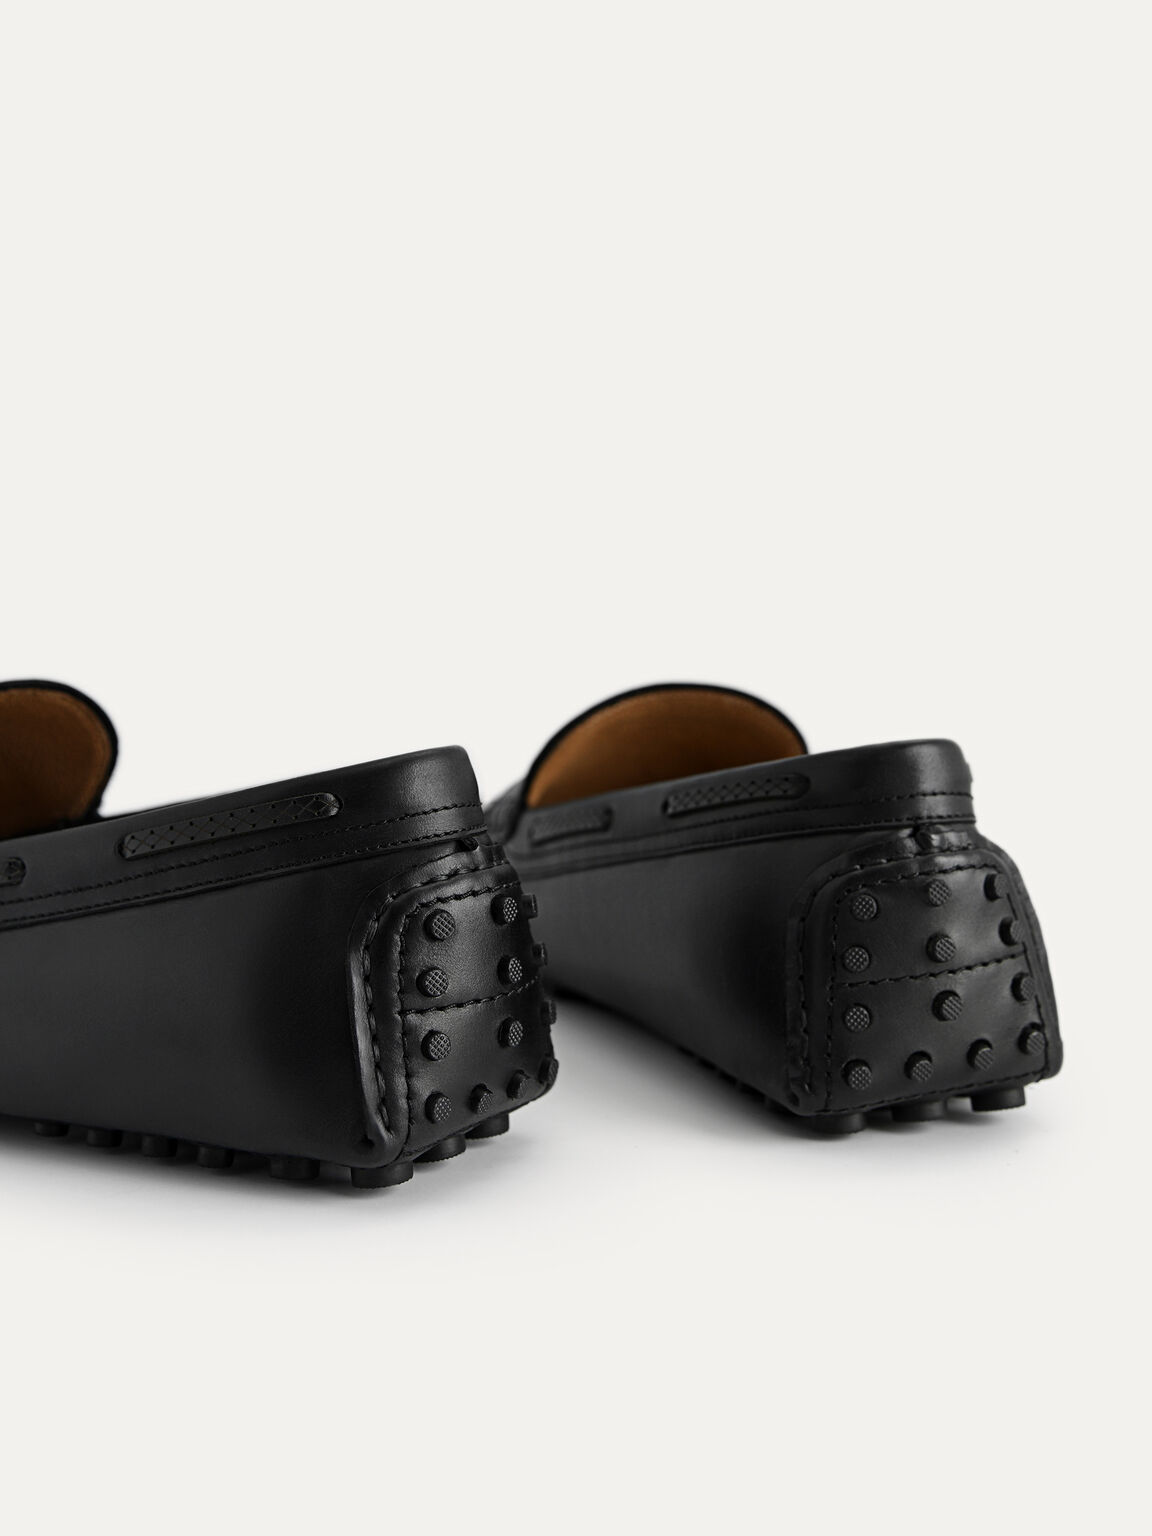 Leather Moccasins with Stitch Detailing, Black